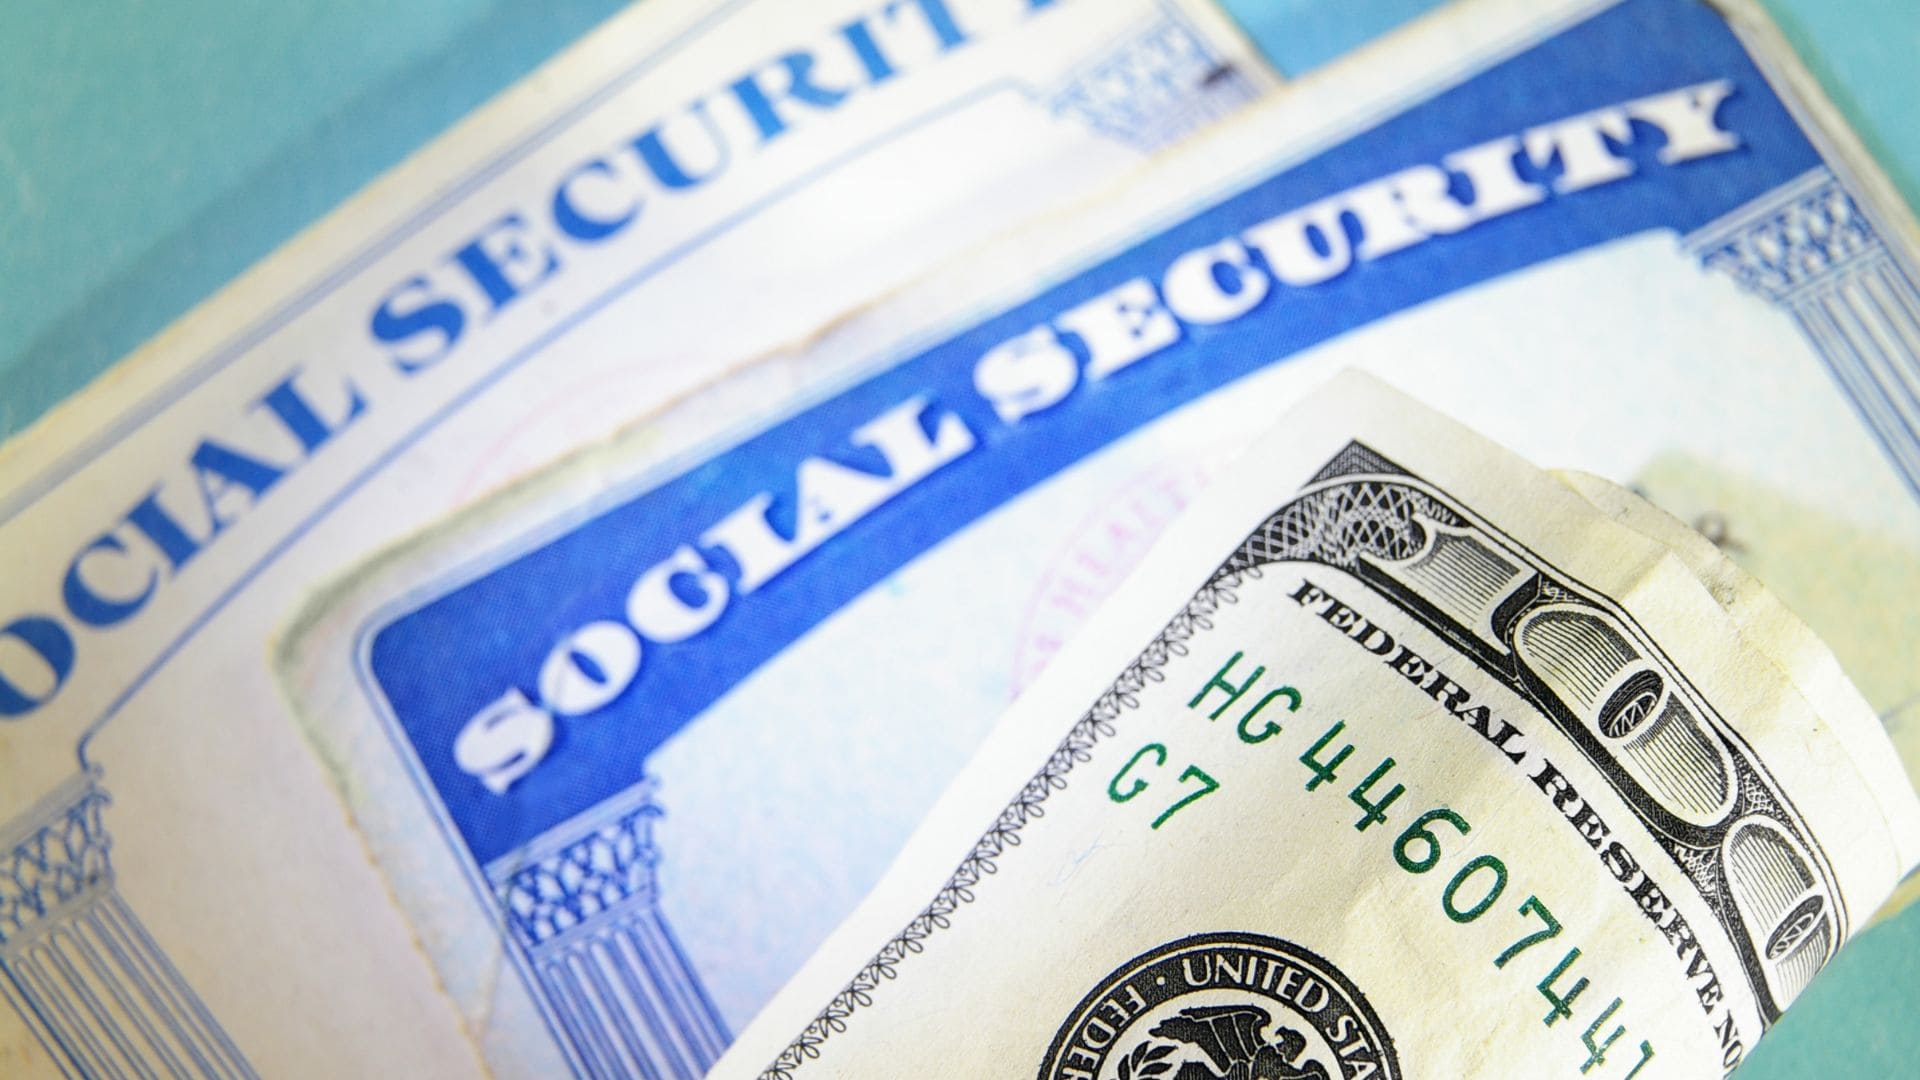 The maximum Social Security check for retirees is 4,555 dollars per month